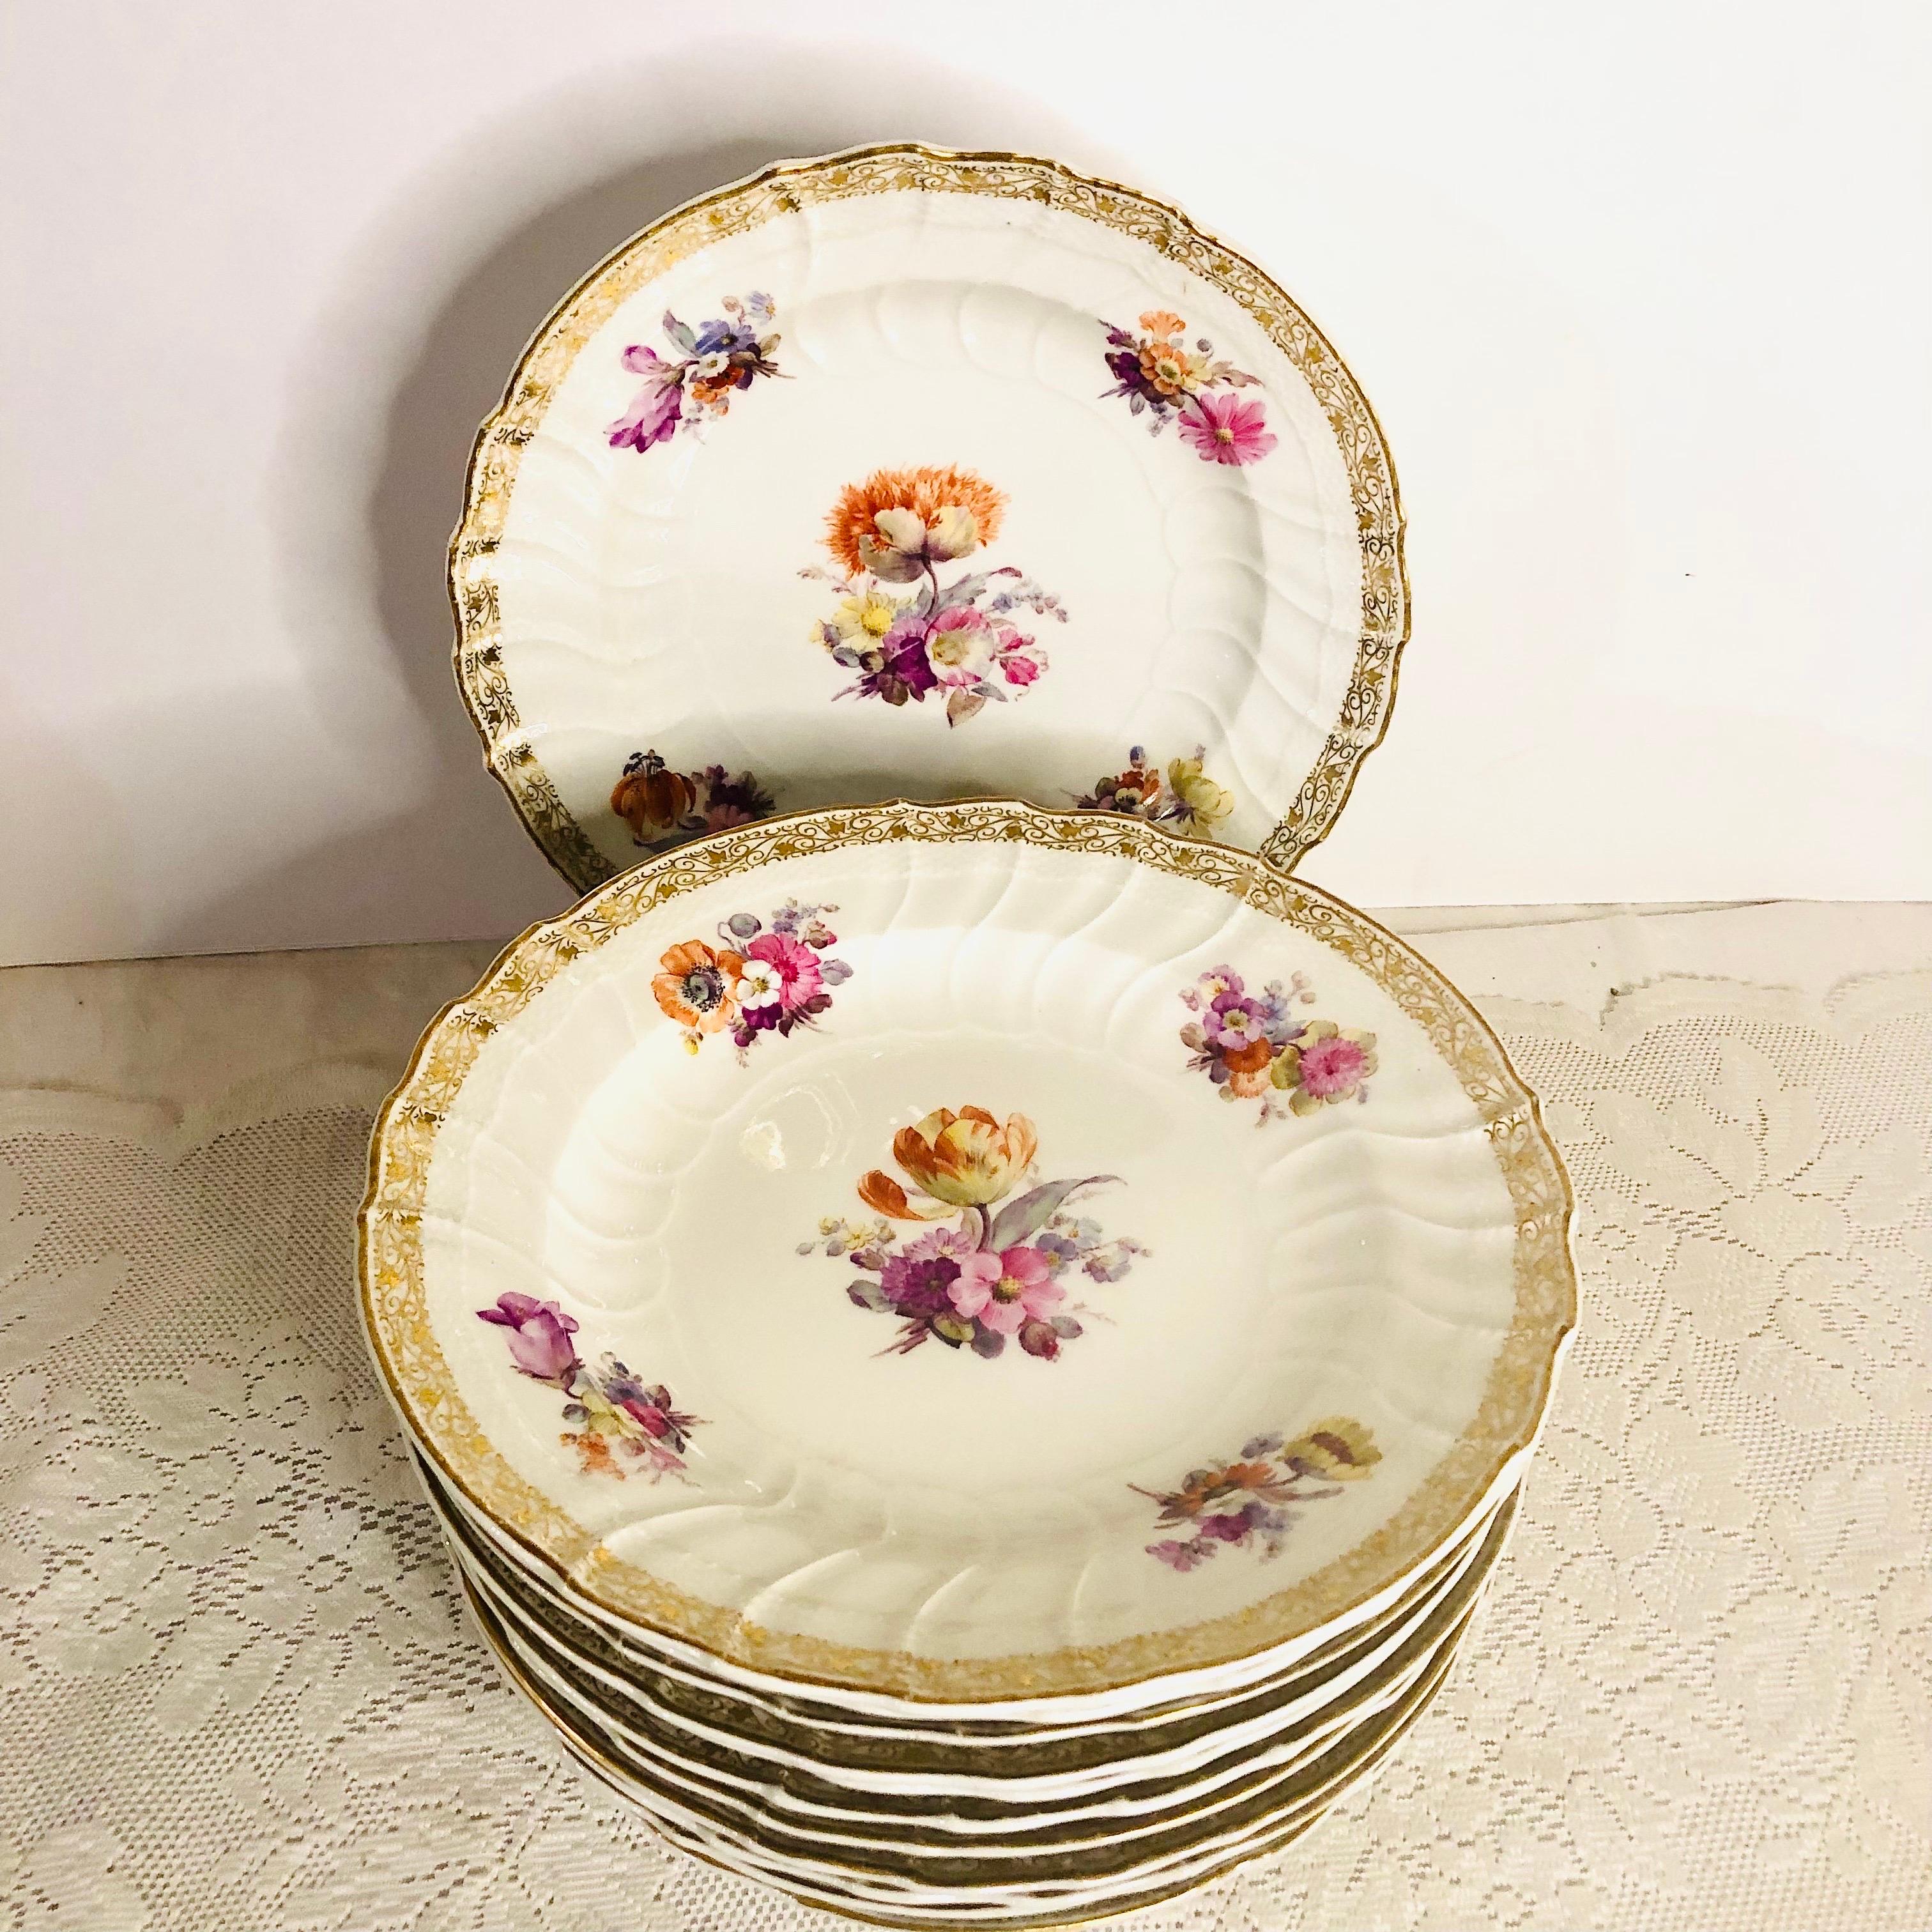 Romantic 12 KPM Dinner Plates, Each Hand-Painted with a Different Central Flower Bouquet For Sale